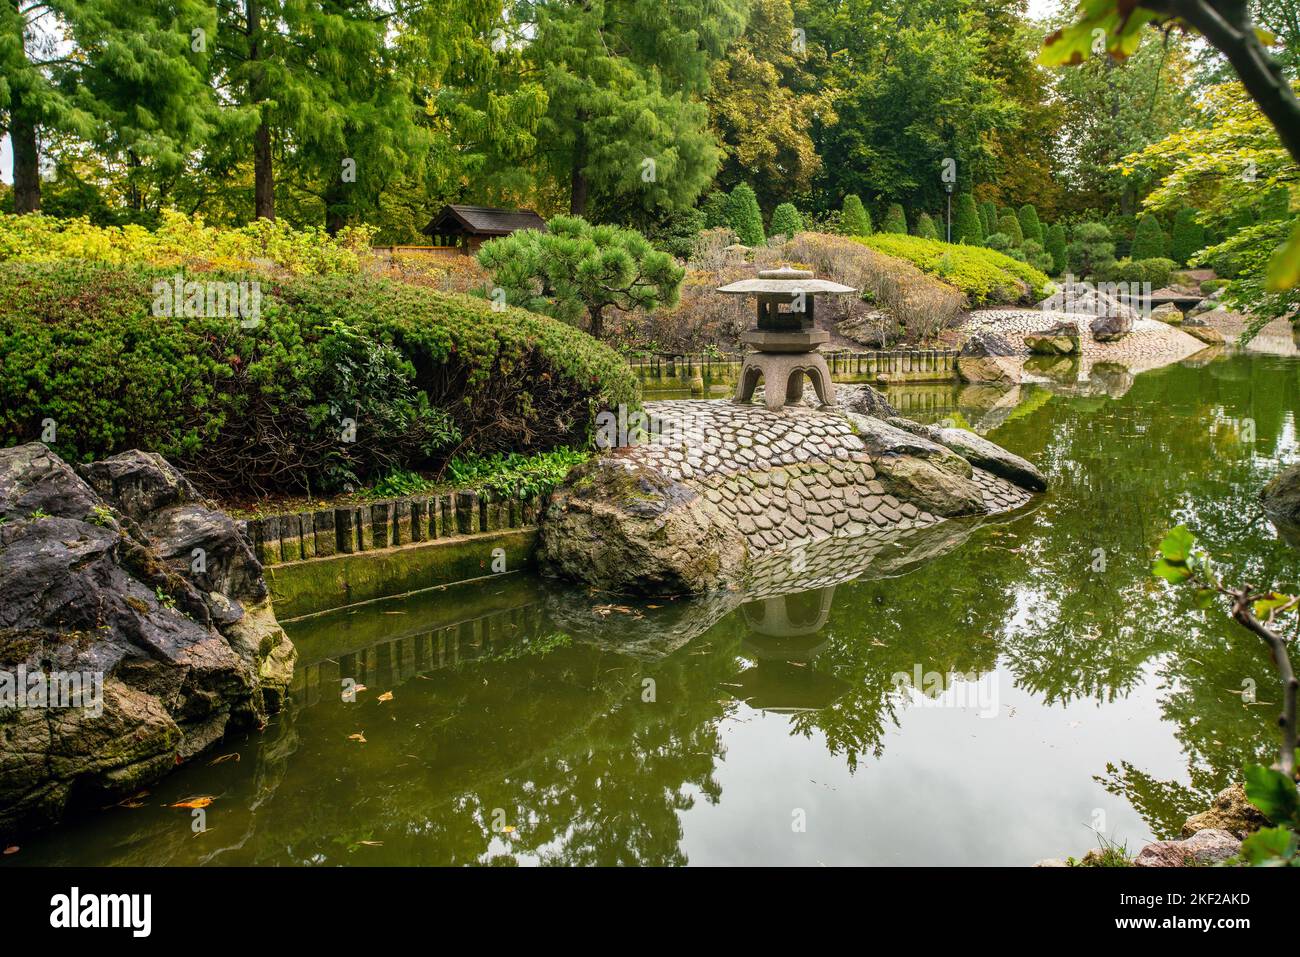 Japanese garden  with lantern and pond  and      Lagarostrobos franklinii   tree in back  in Bonn Germany Stock Photo